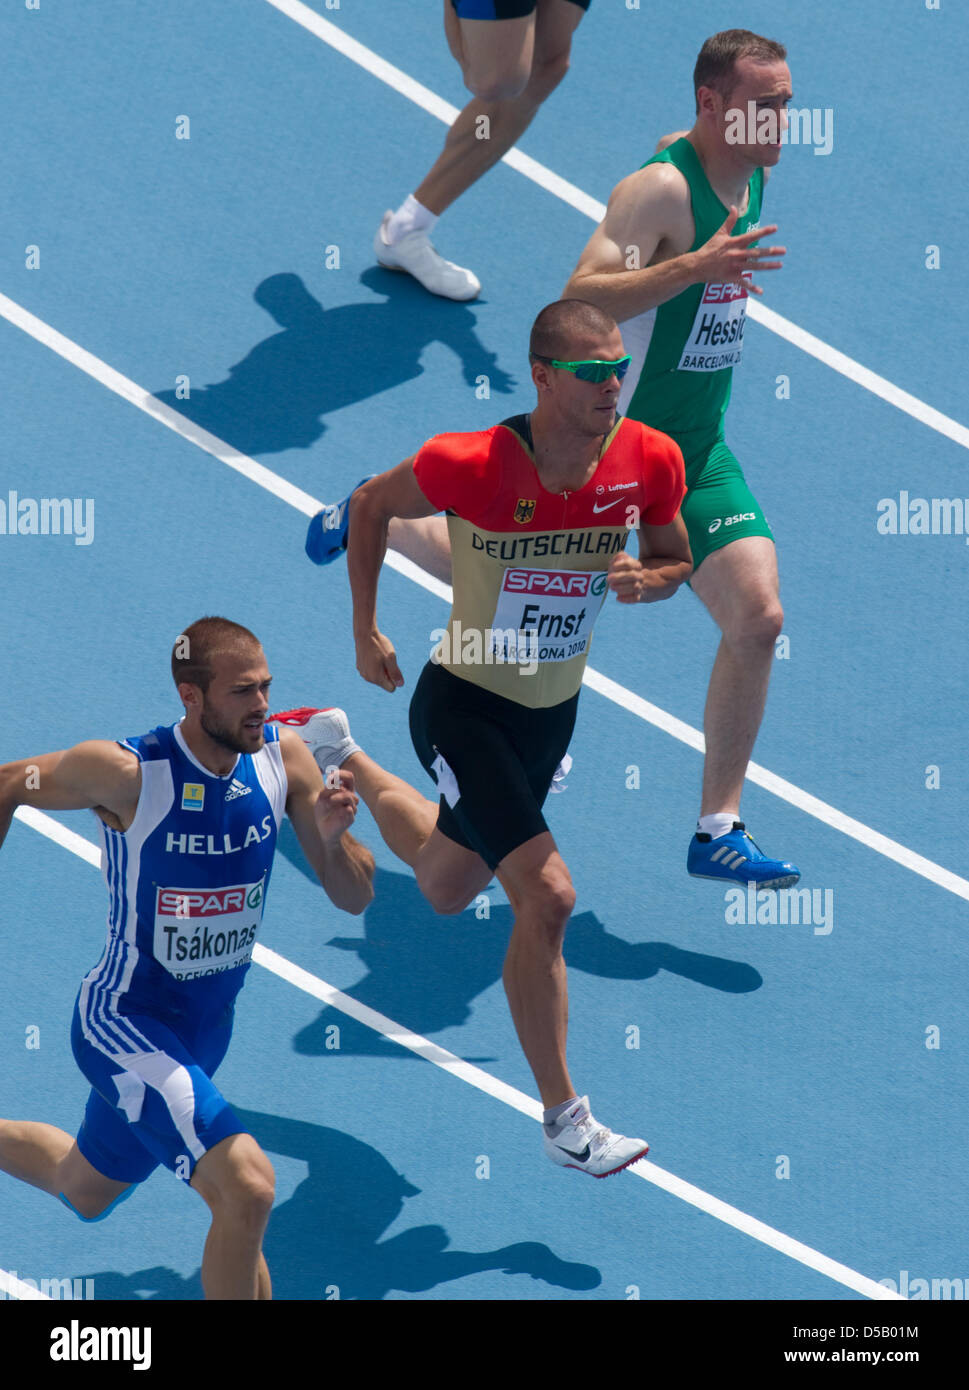 European Athletics Championships at the Lluis Companys Olympic Stadium in Barcelona, Spain, 29 July 2010. German sprinter Sebastian Ernst (M) performs during the qualification round of the 200 metres run. Below, Lykourgos Stefanos from Greece, above, Paul Hession from Ireland. Photo: Bernd Thissen Stock Photo